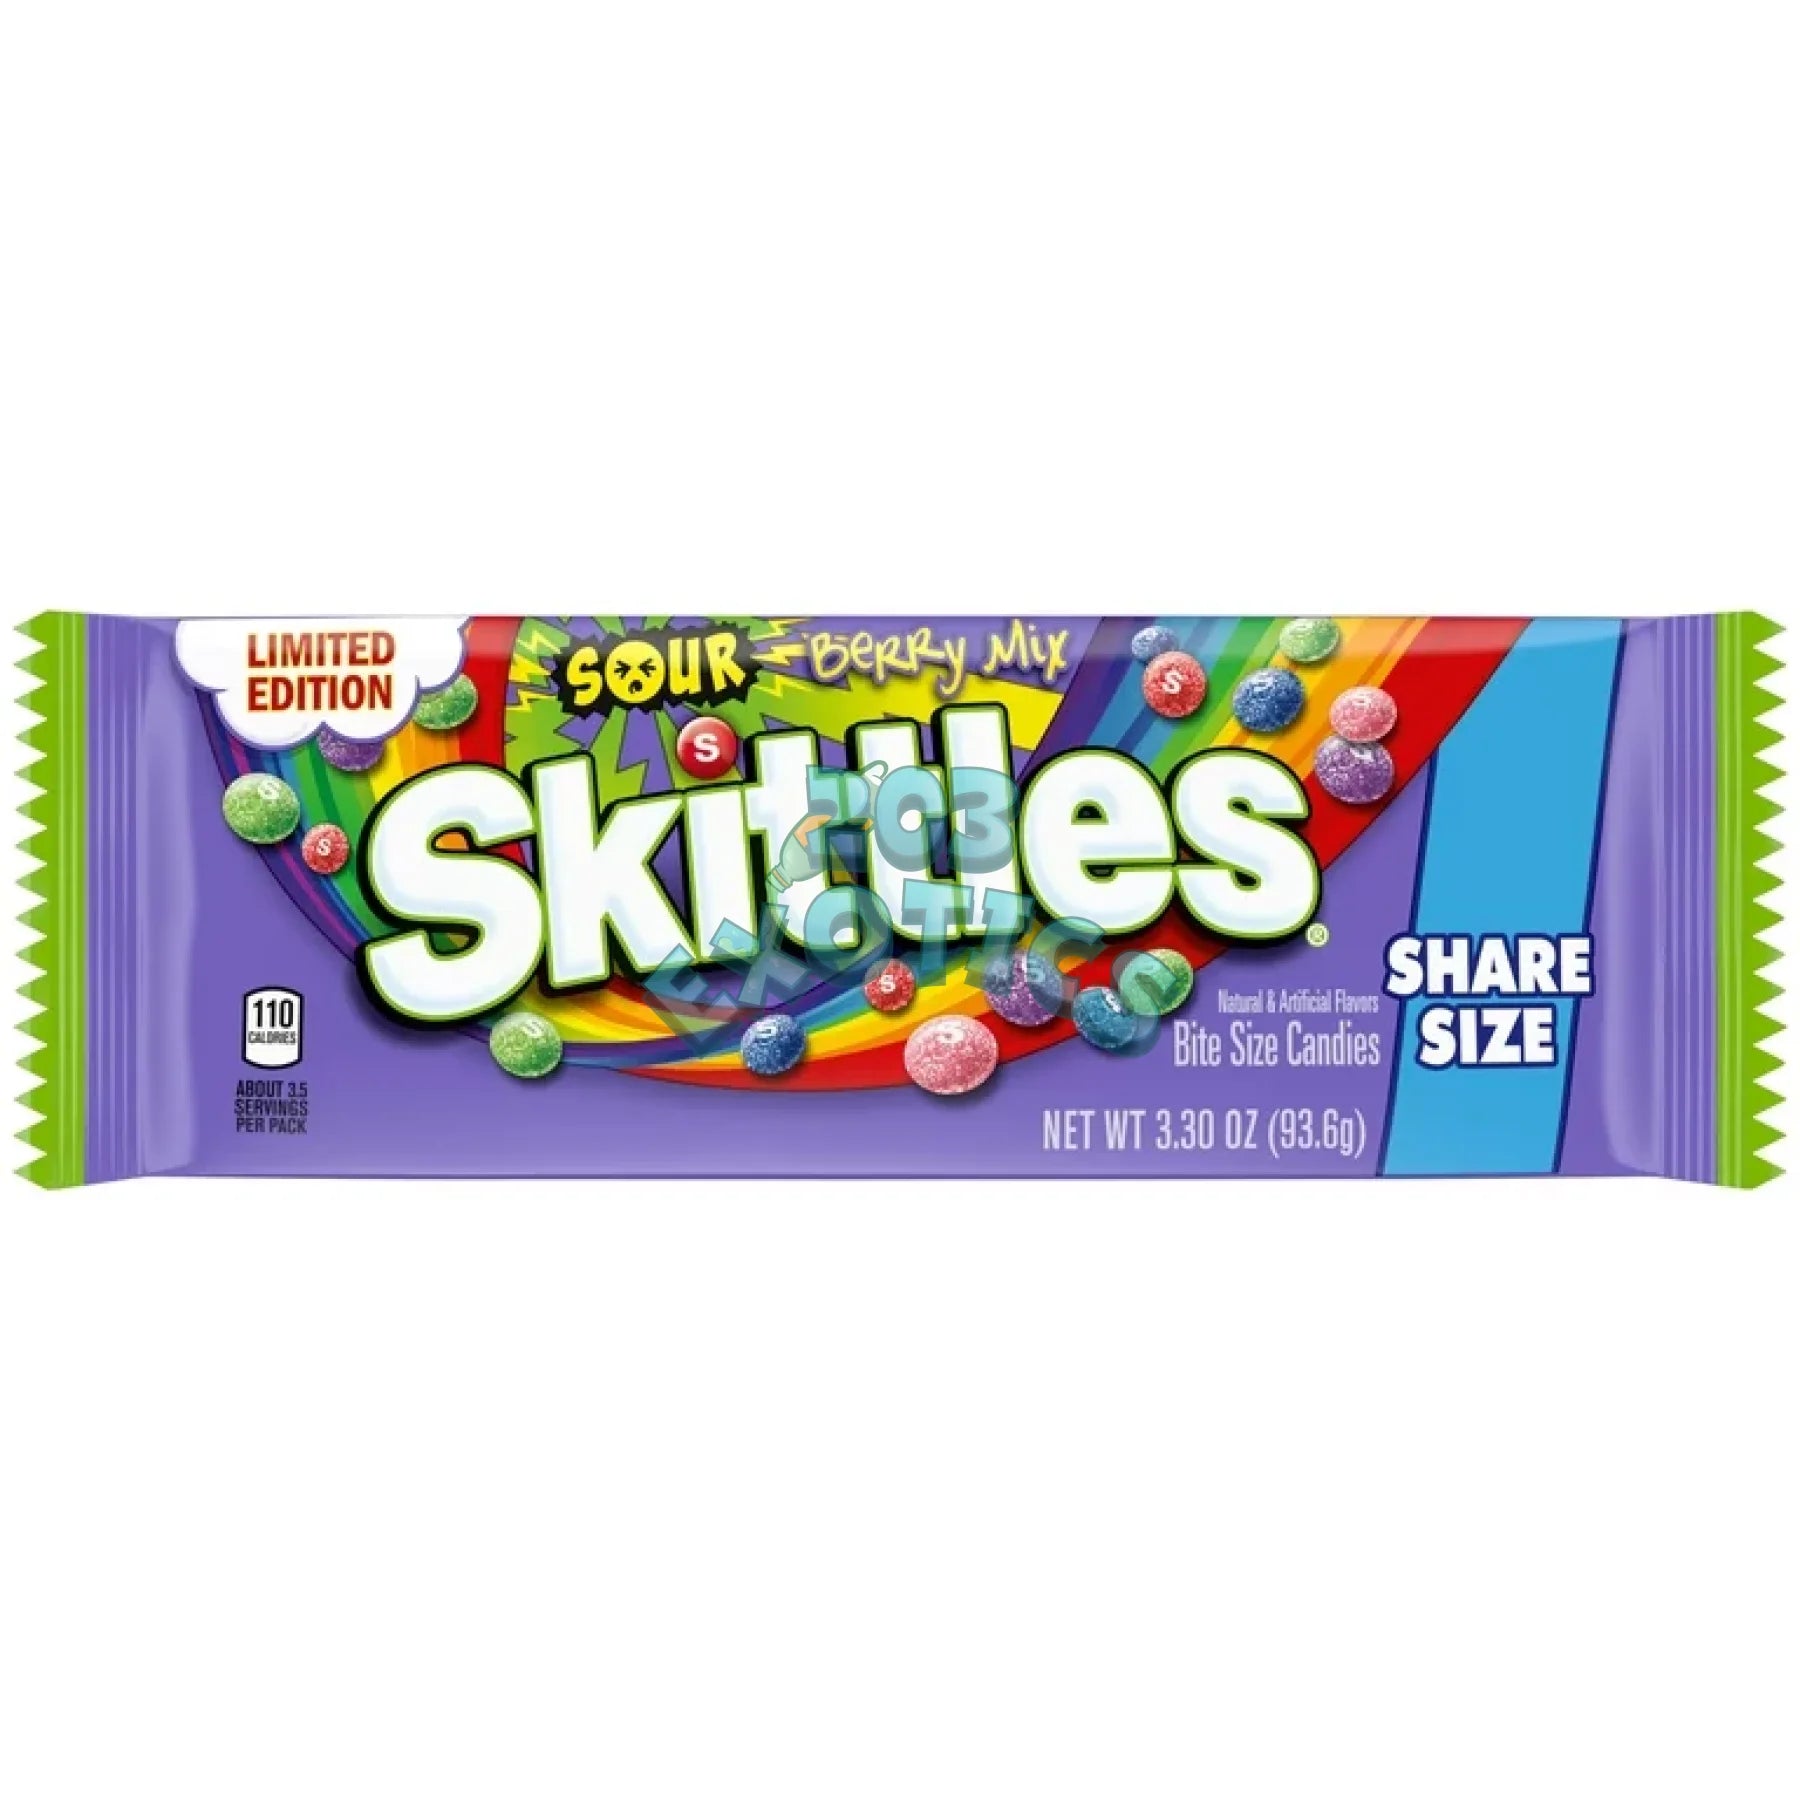 Skittles Sour Berry Mix (94G)